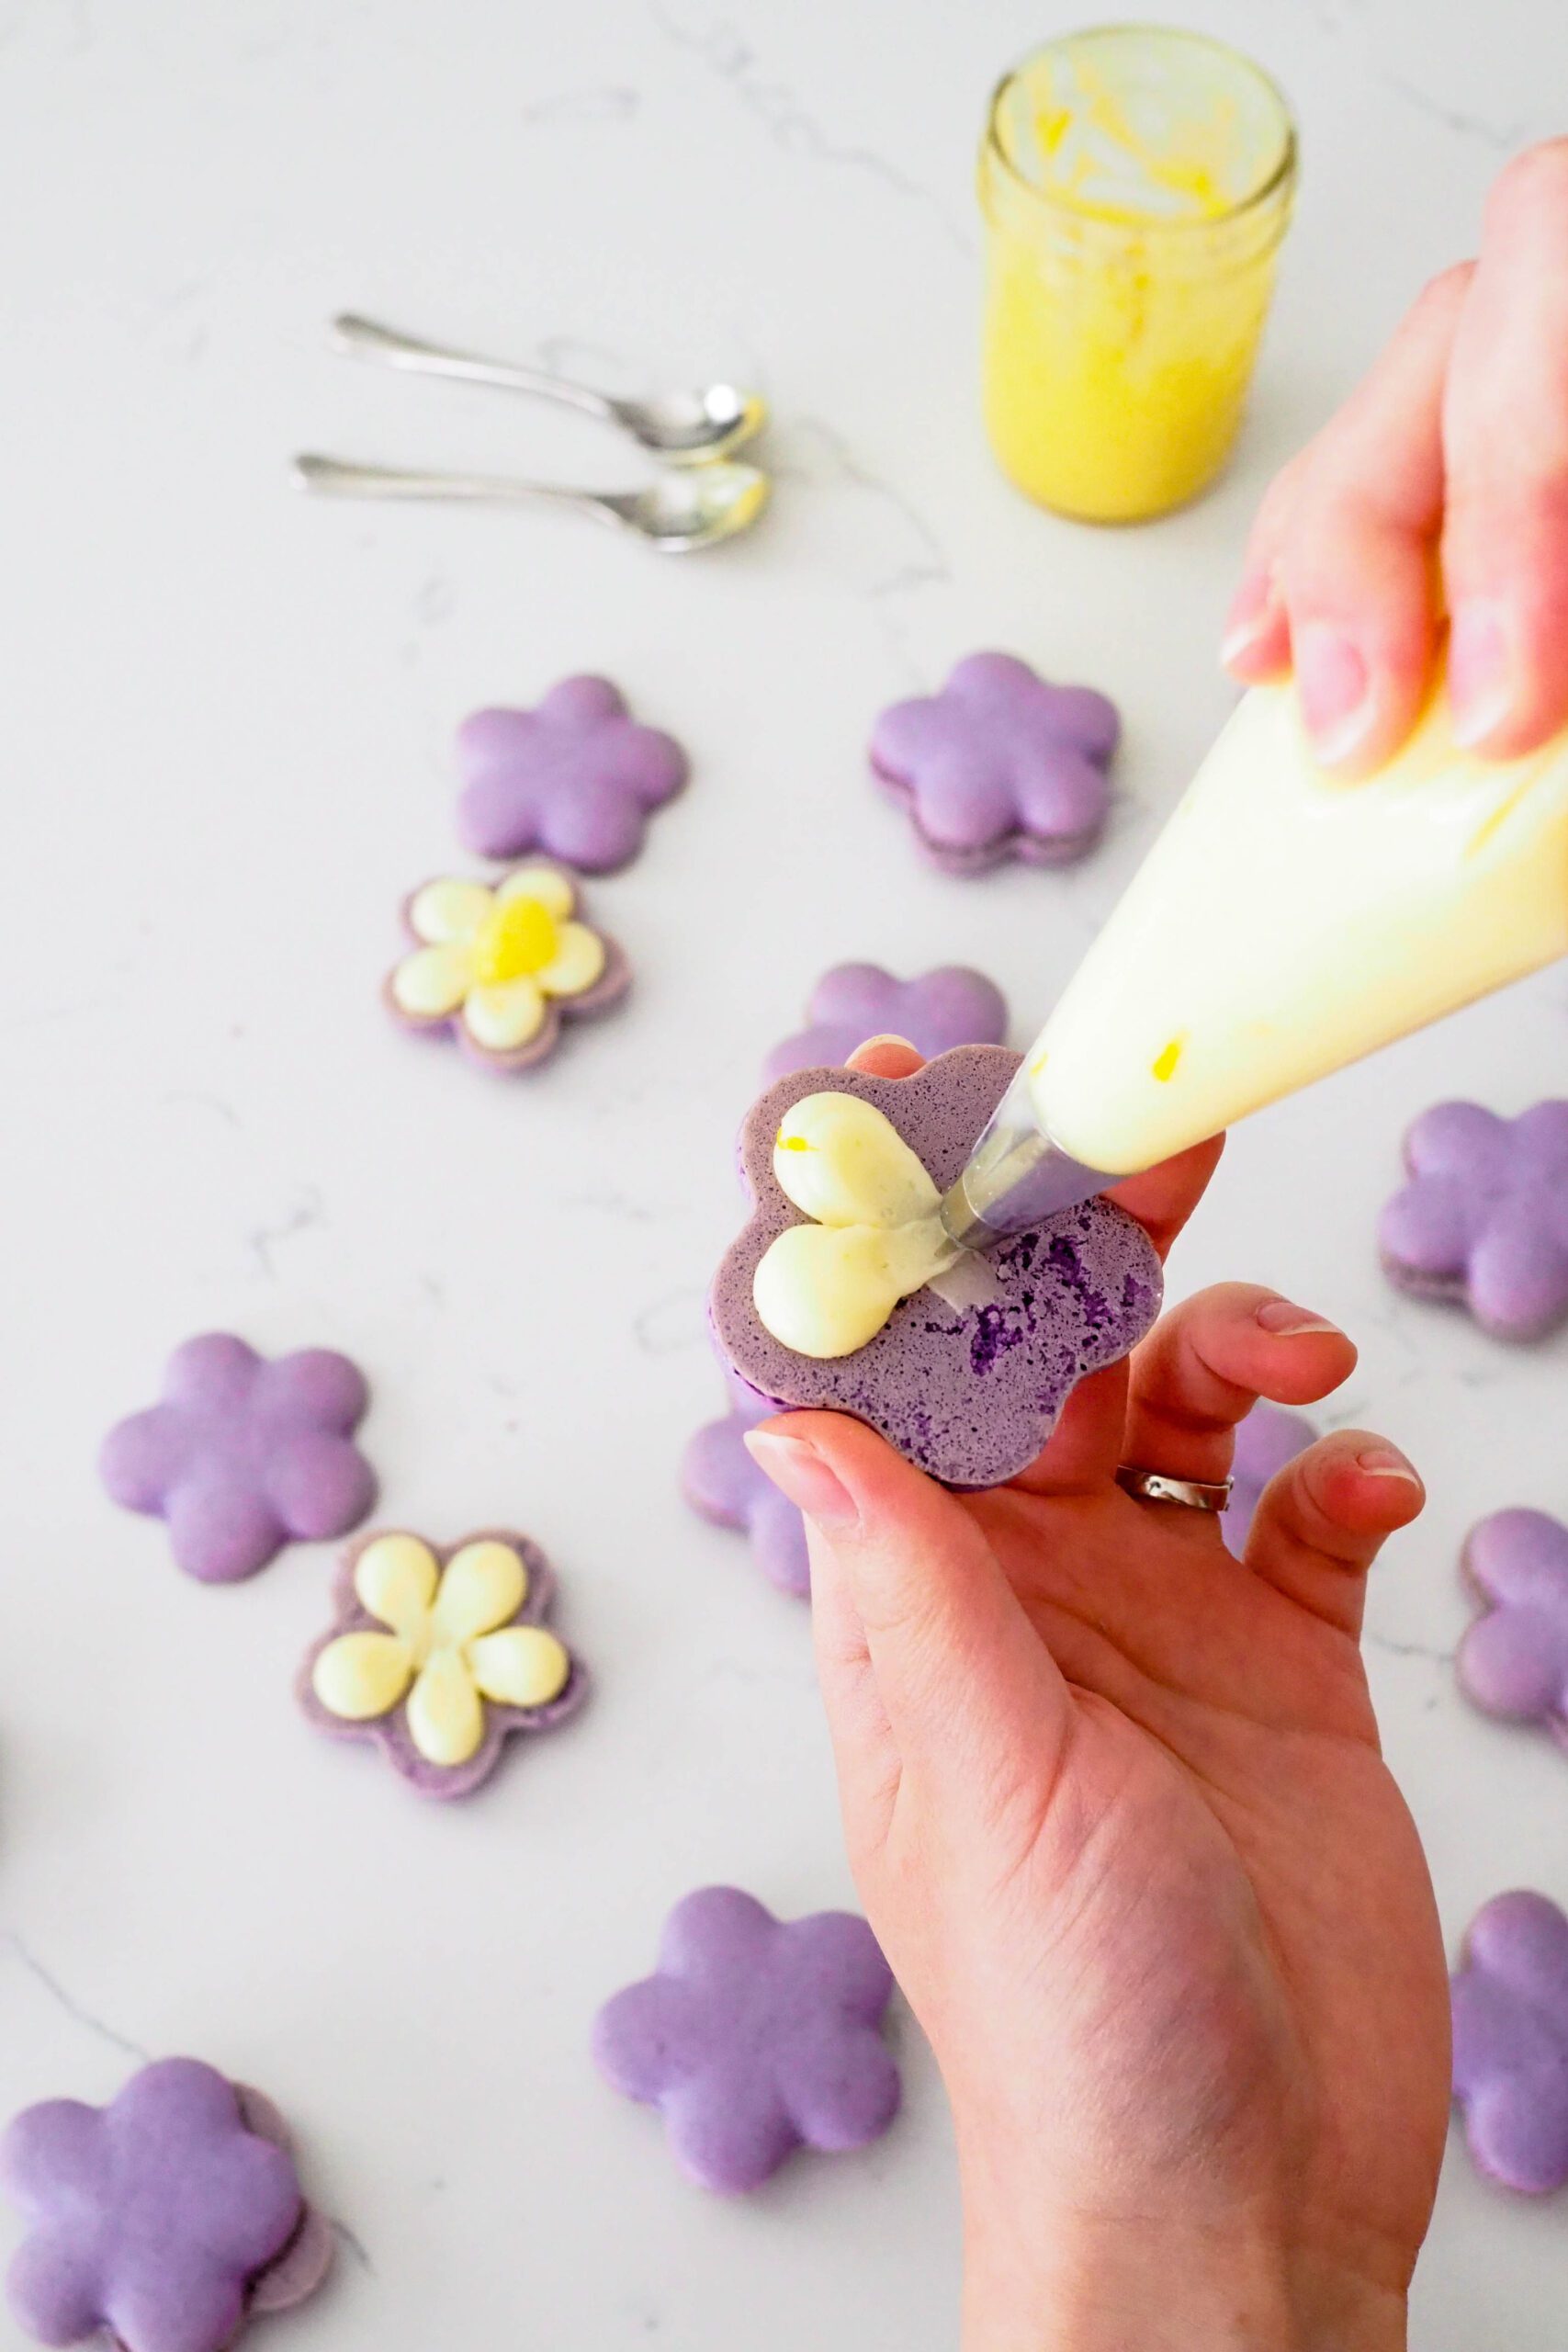 A piping tip pipes circles on the underside of a flower-shaped macaron.